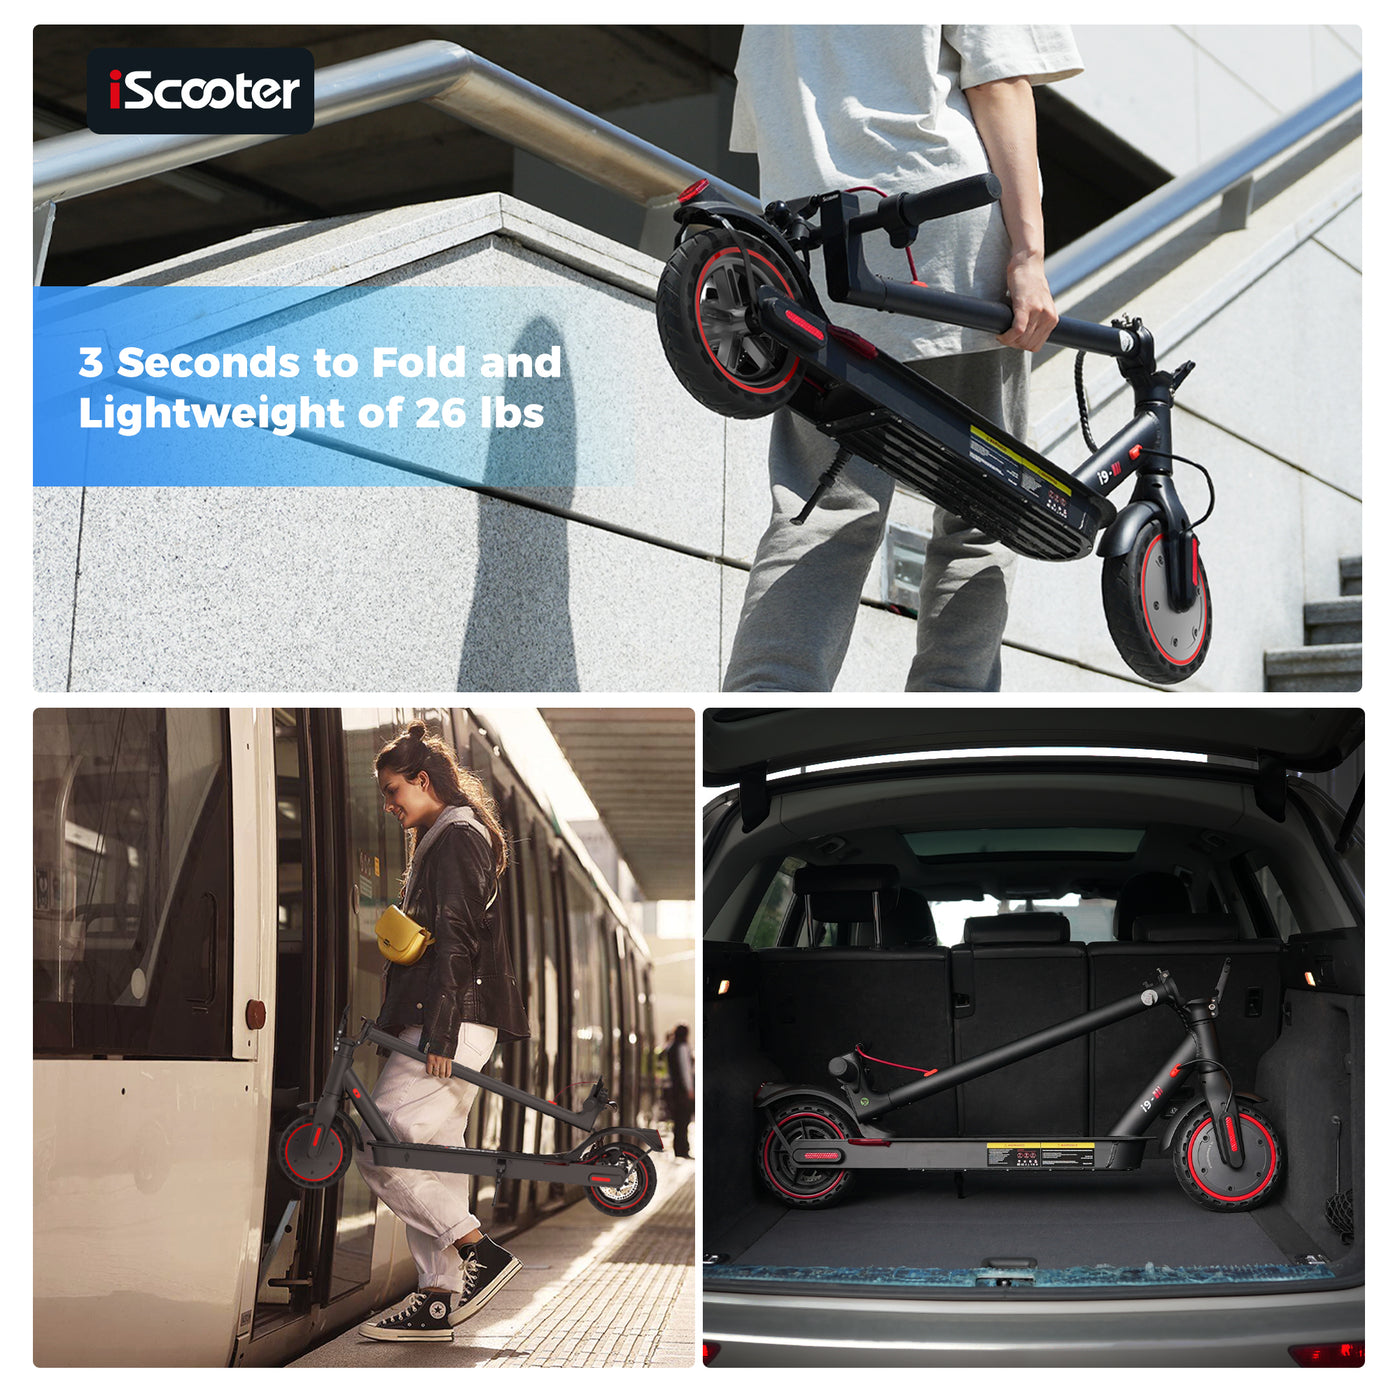 iScooter i9 Commuter Electric Scooter